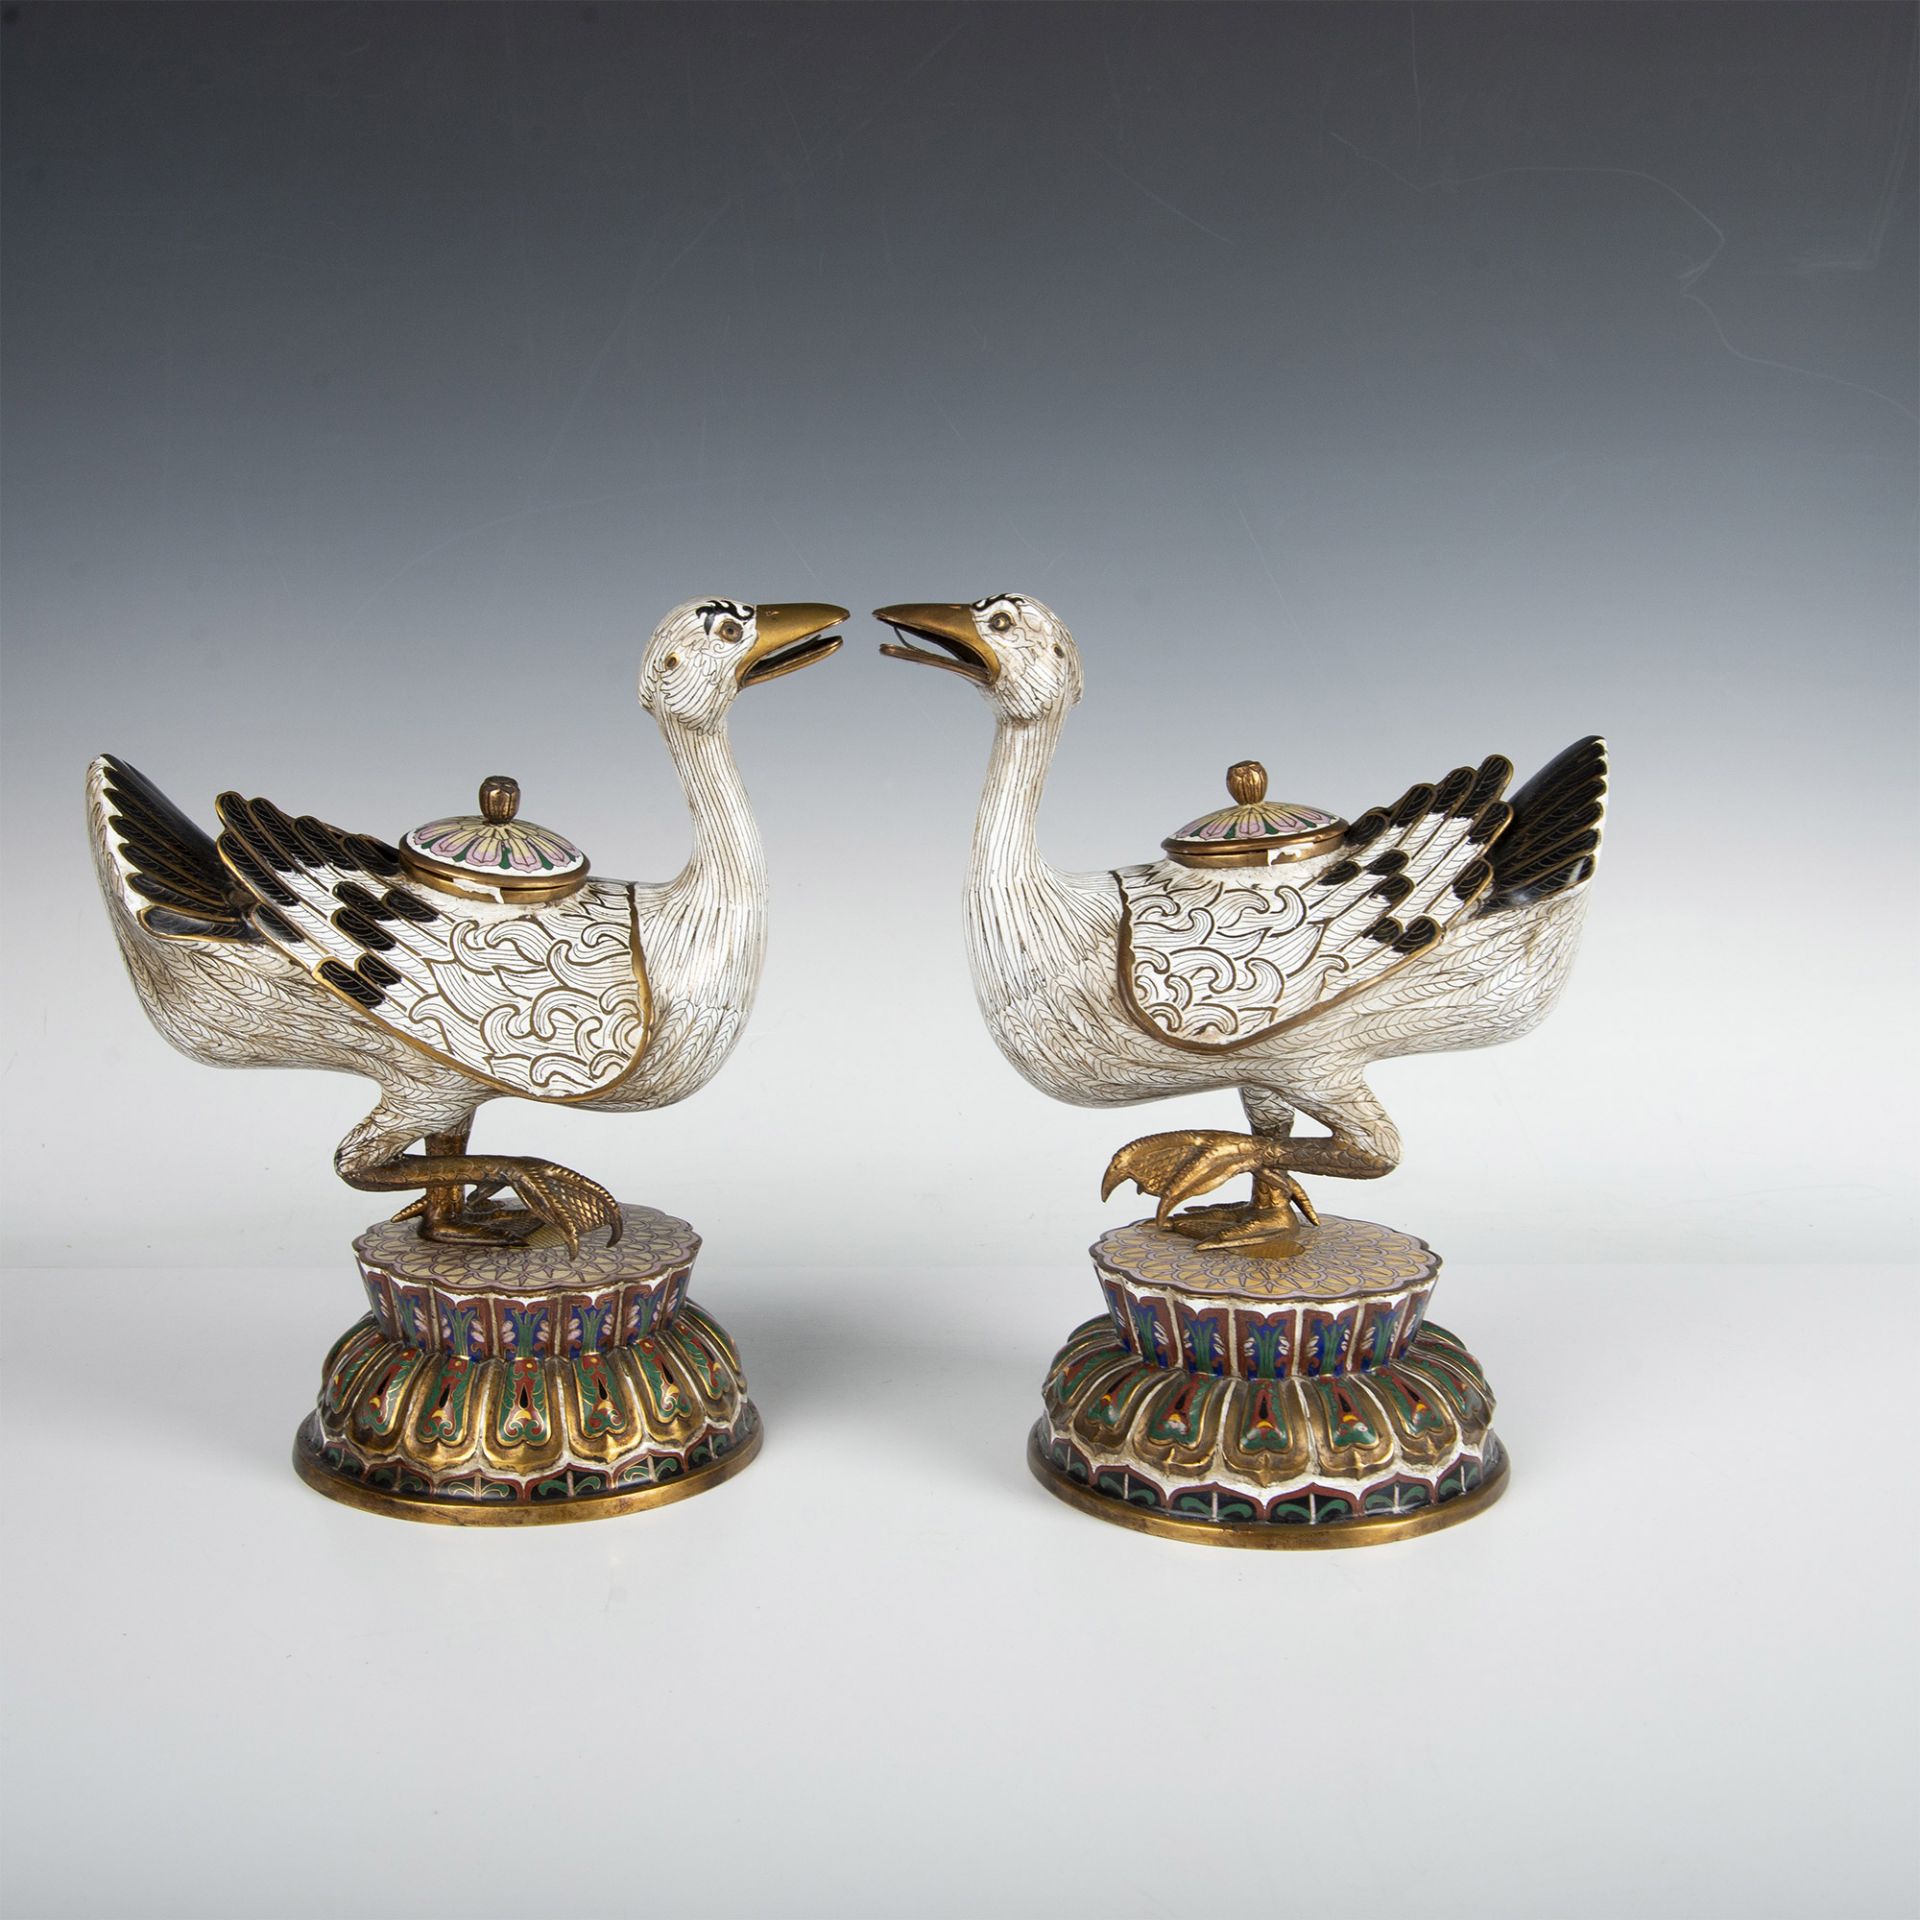 Pair of Chinese Cloisonne Duck Censers - Image 4 of 11